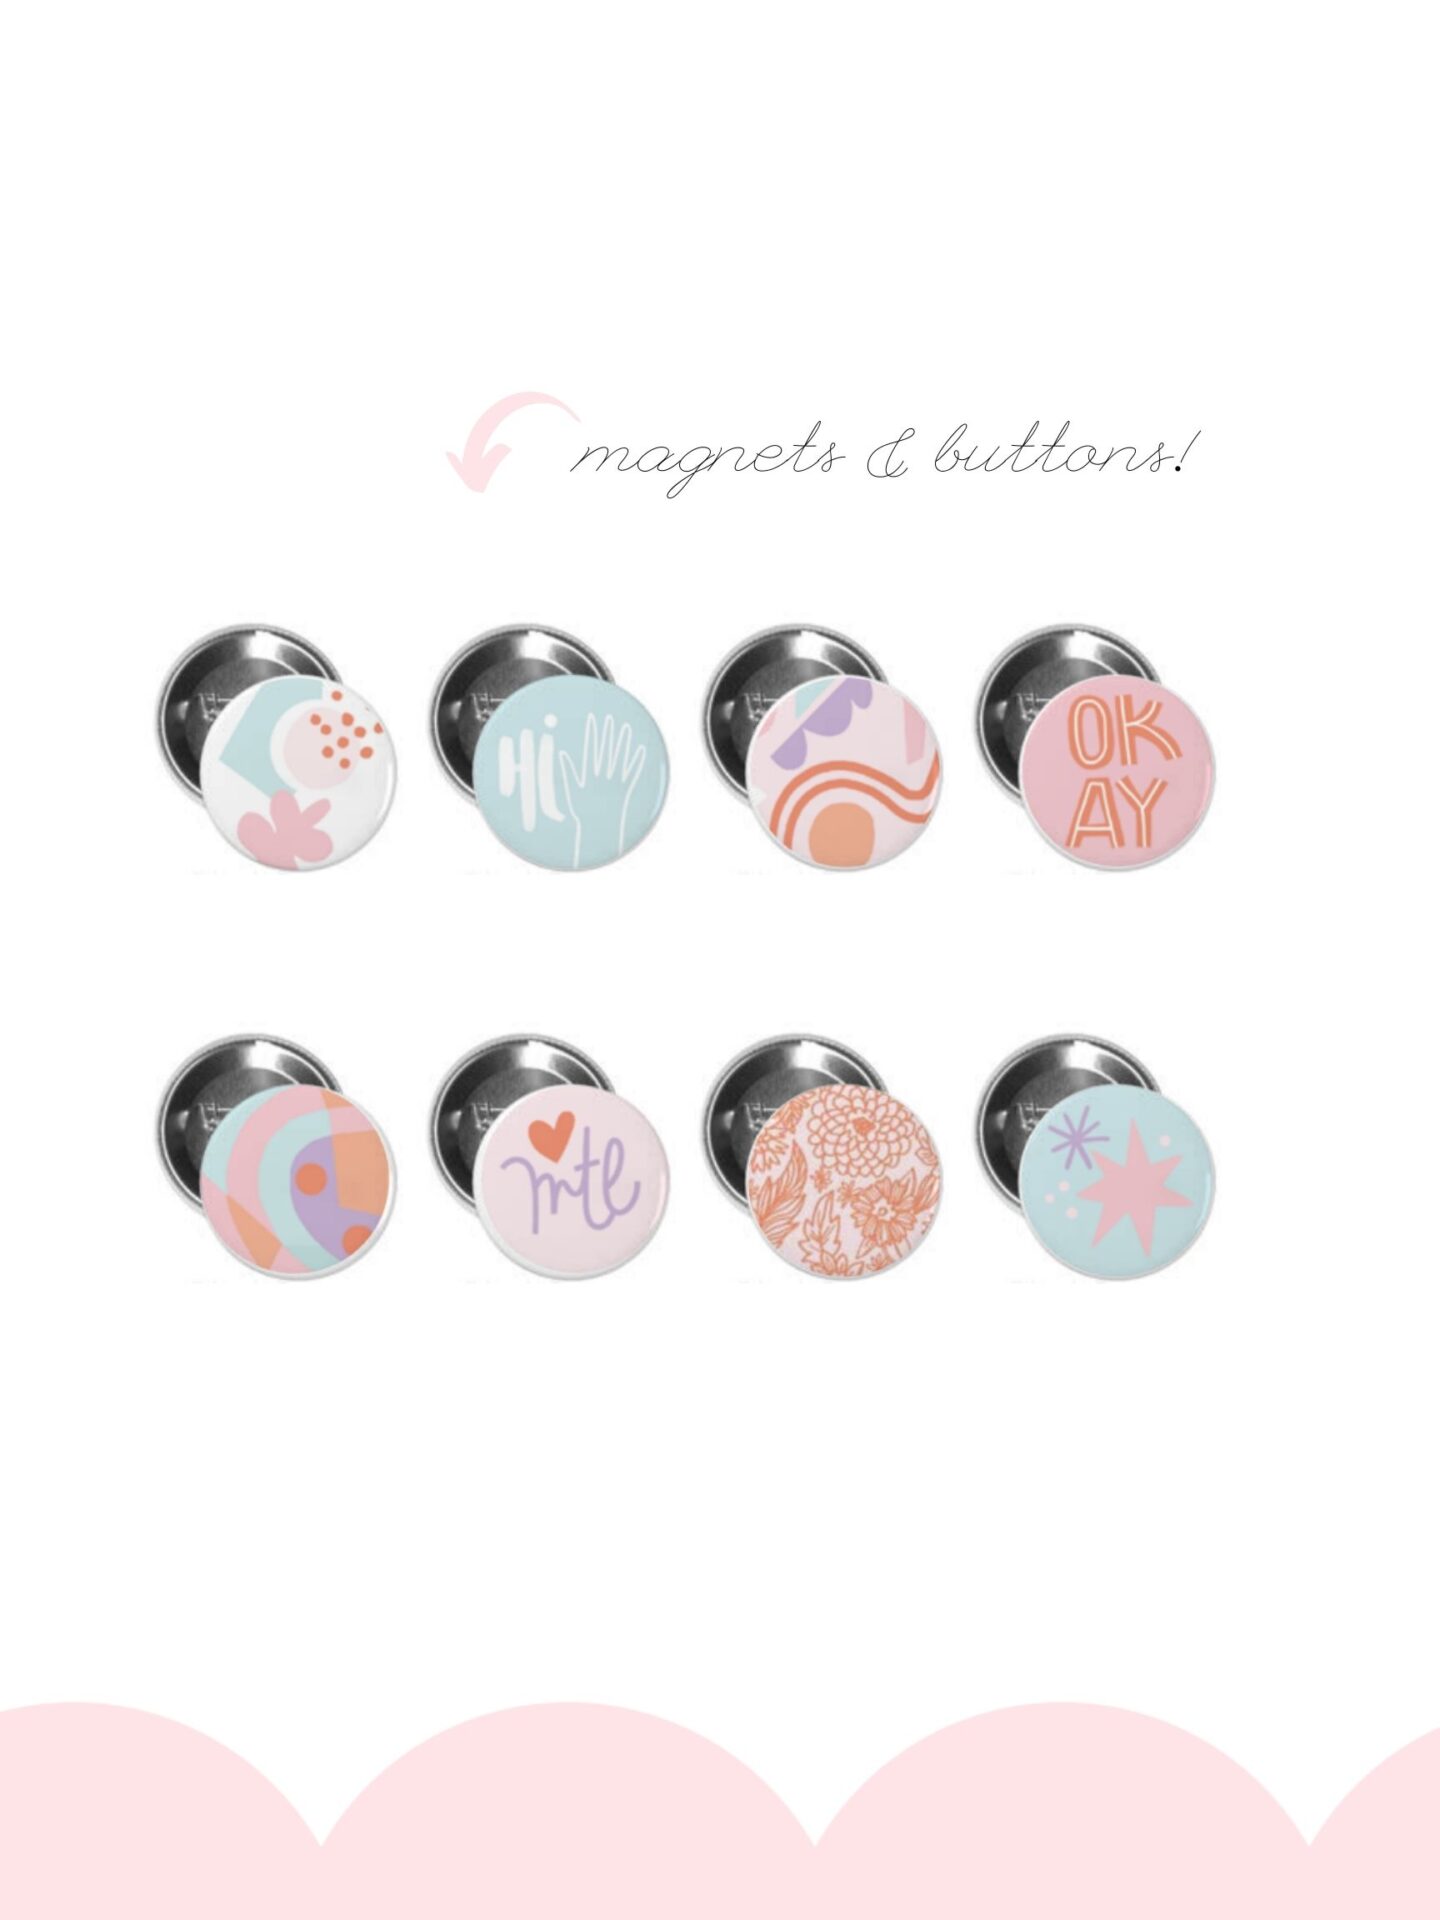 buttons and magnets with colorful designs